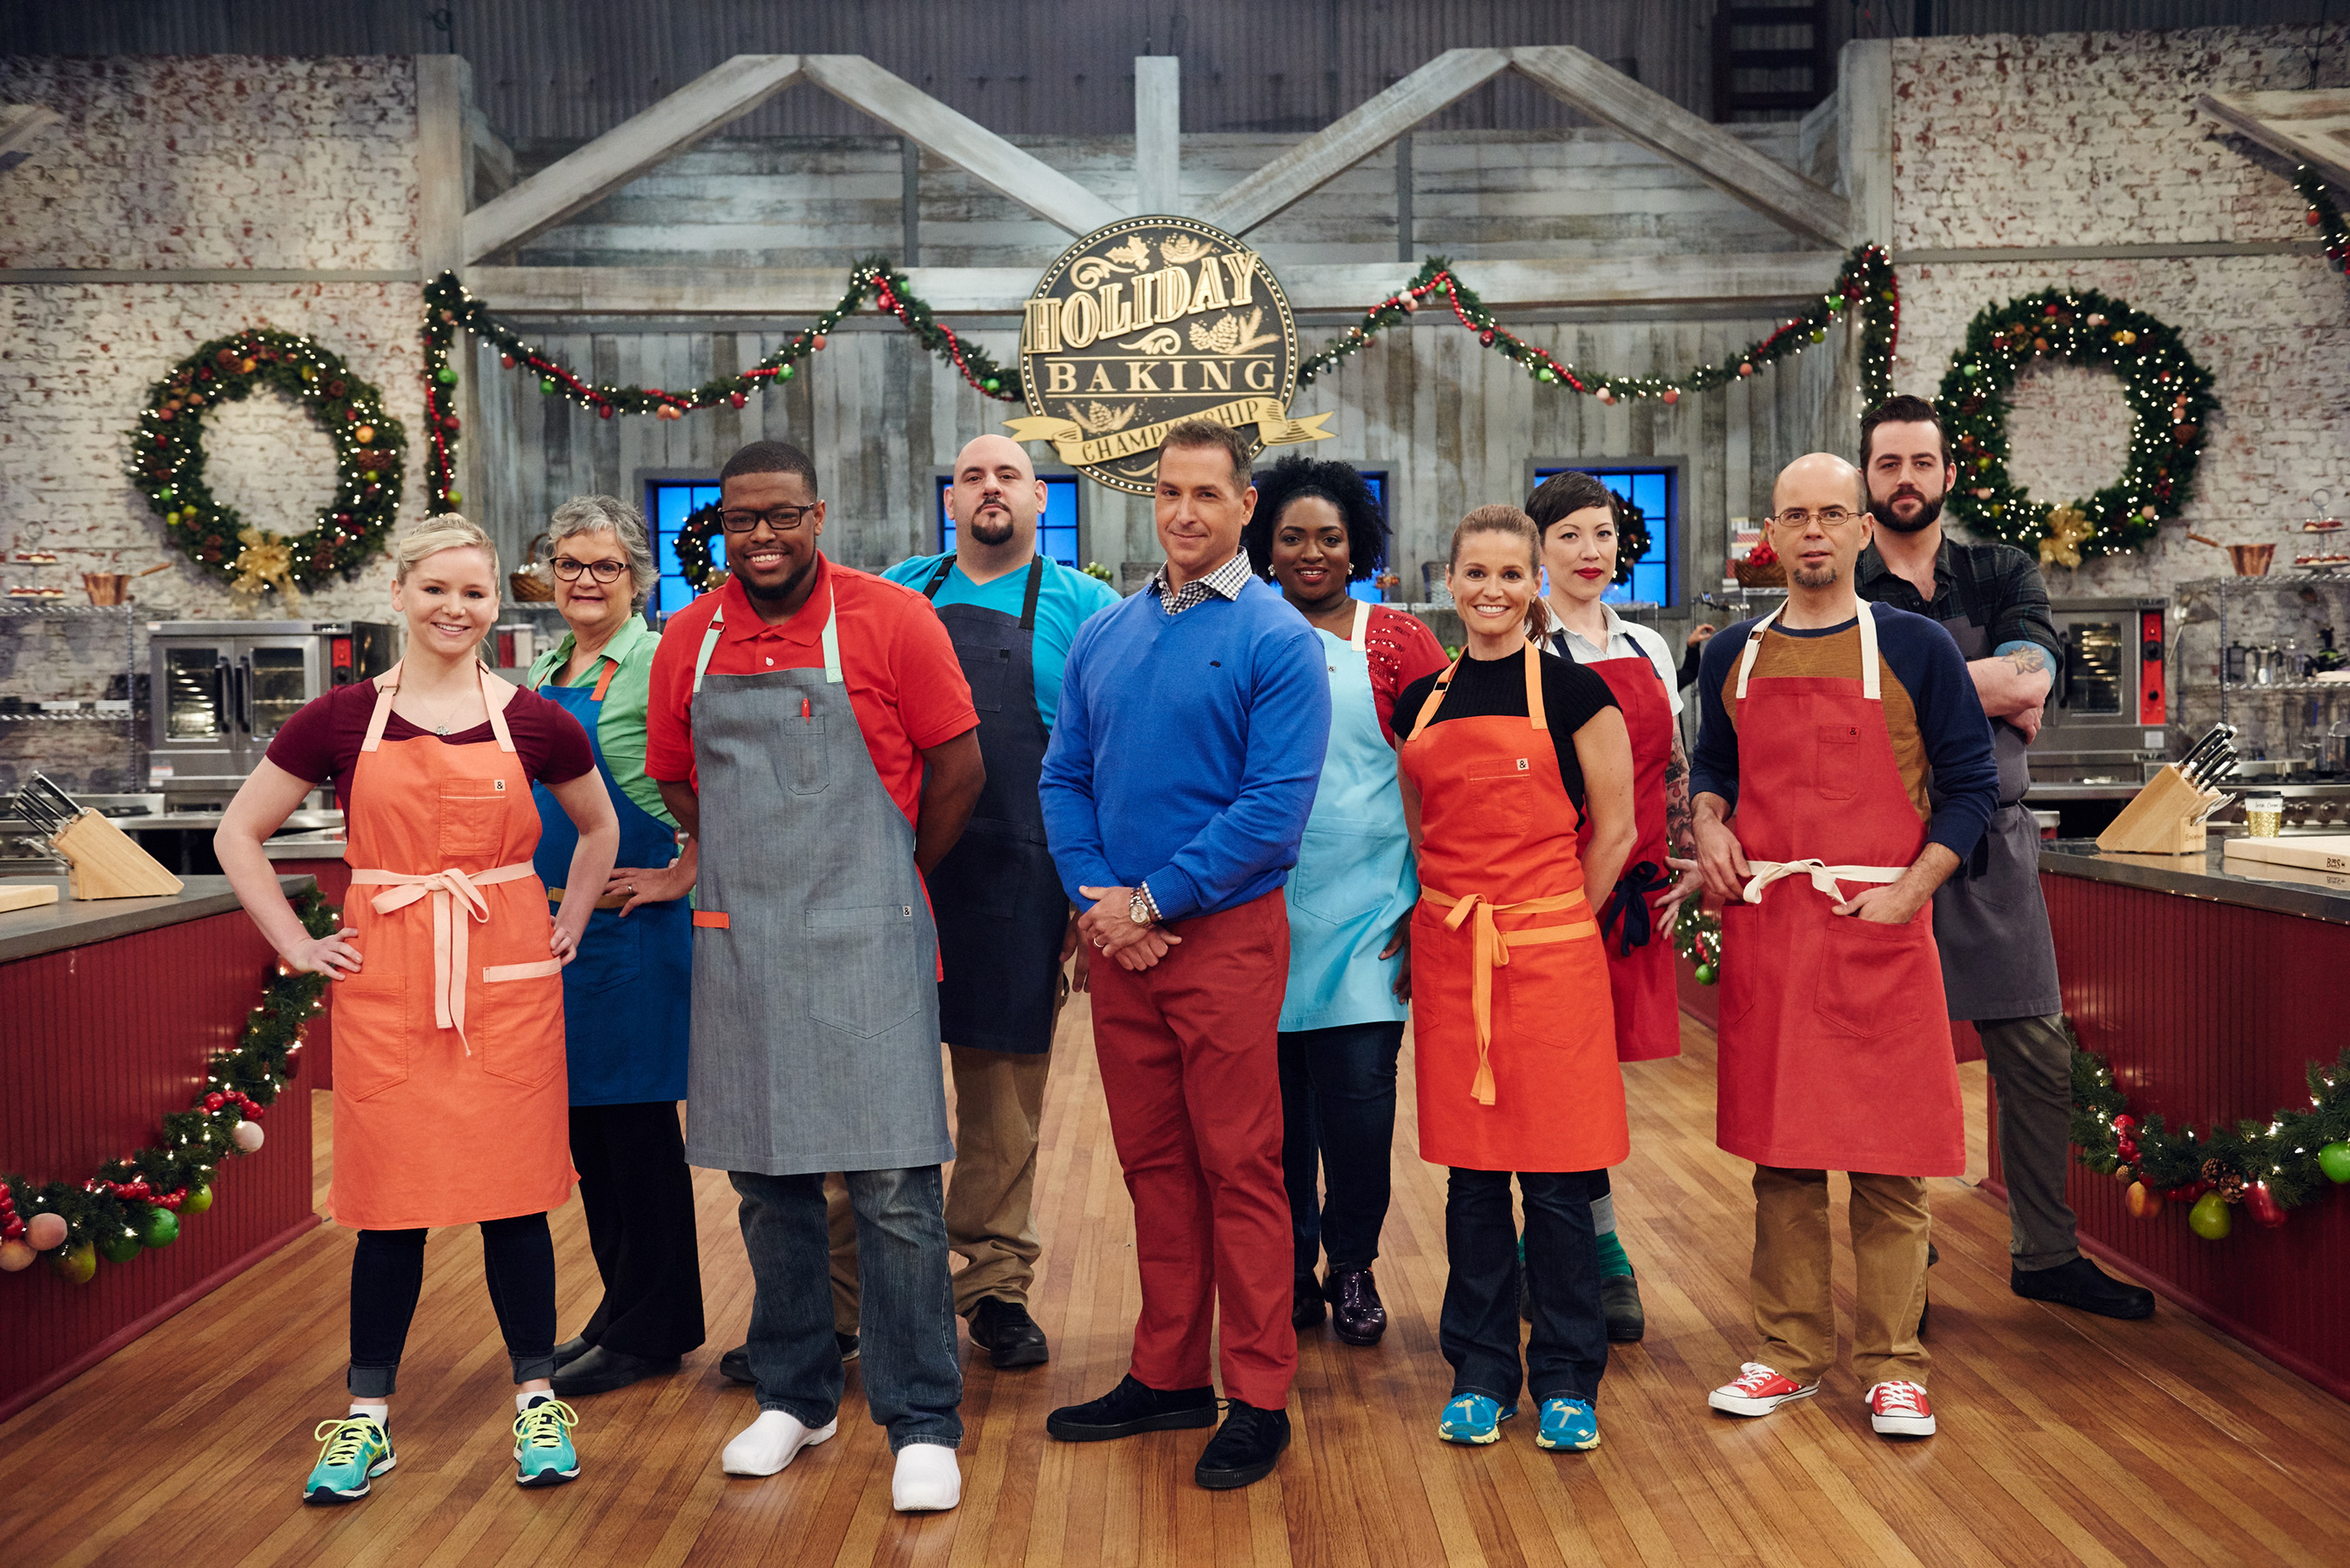 Host Bobby Deen with the contestants of Food Network's Holiday Baking Championship